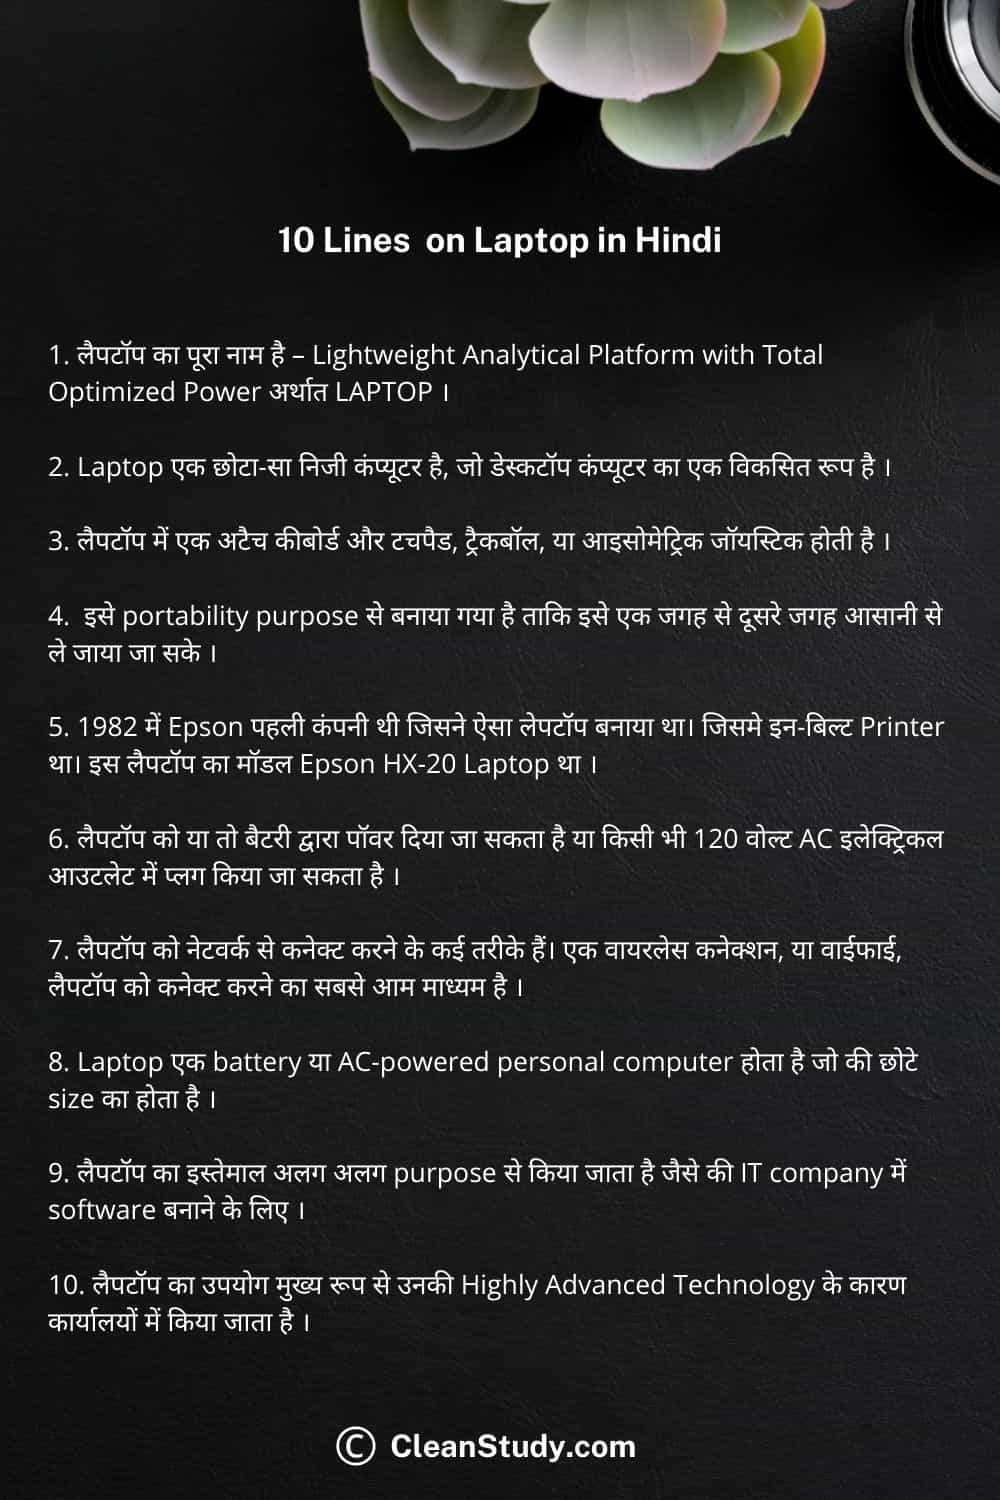 10 lines on laptop in hindi